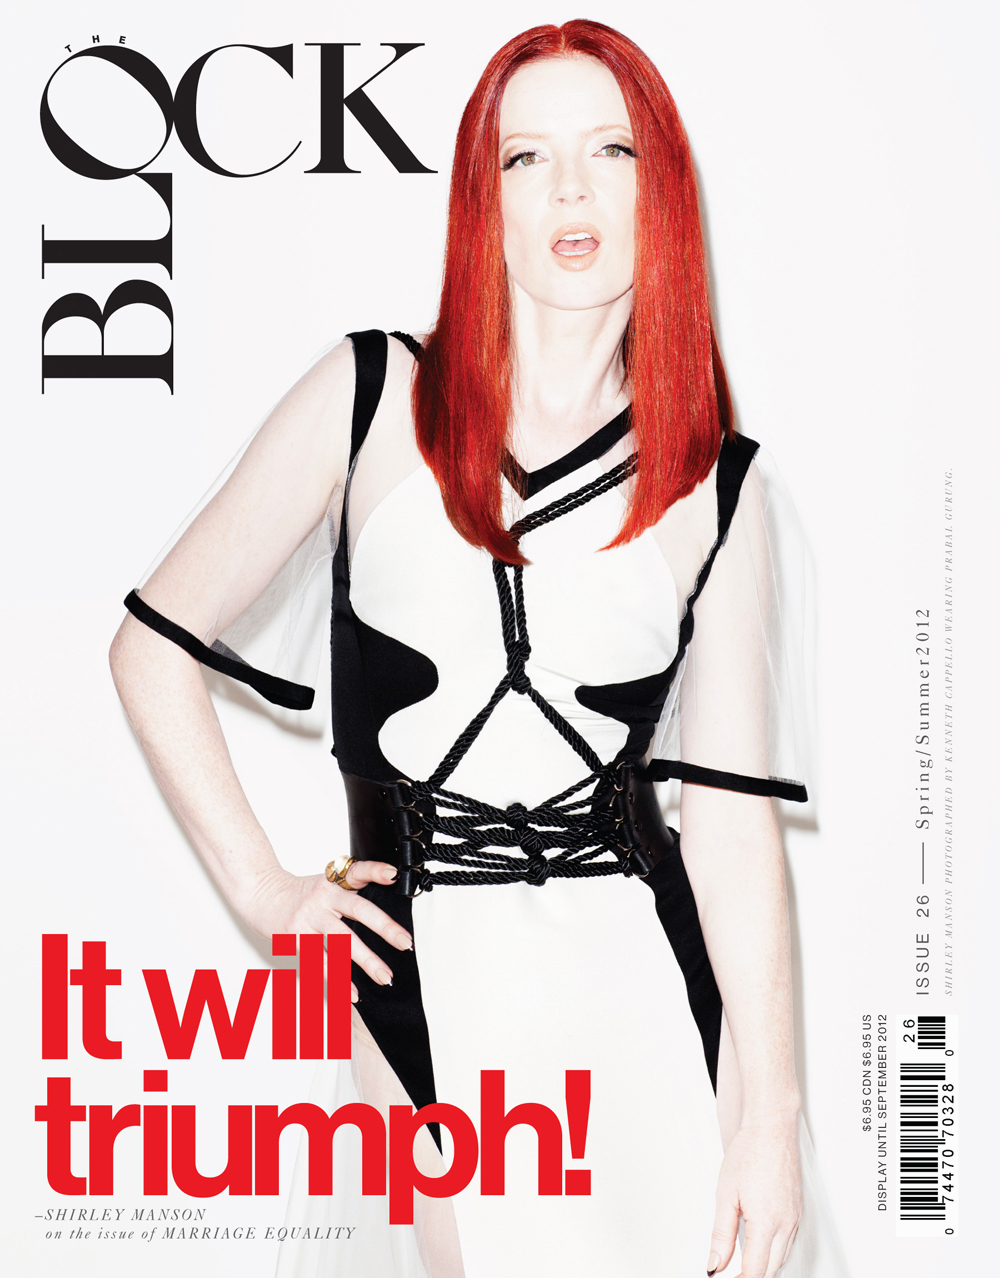 Shirley Manson in The Block Magazine #26 by Kenneth Cappello